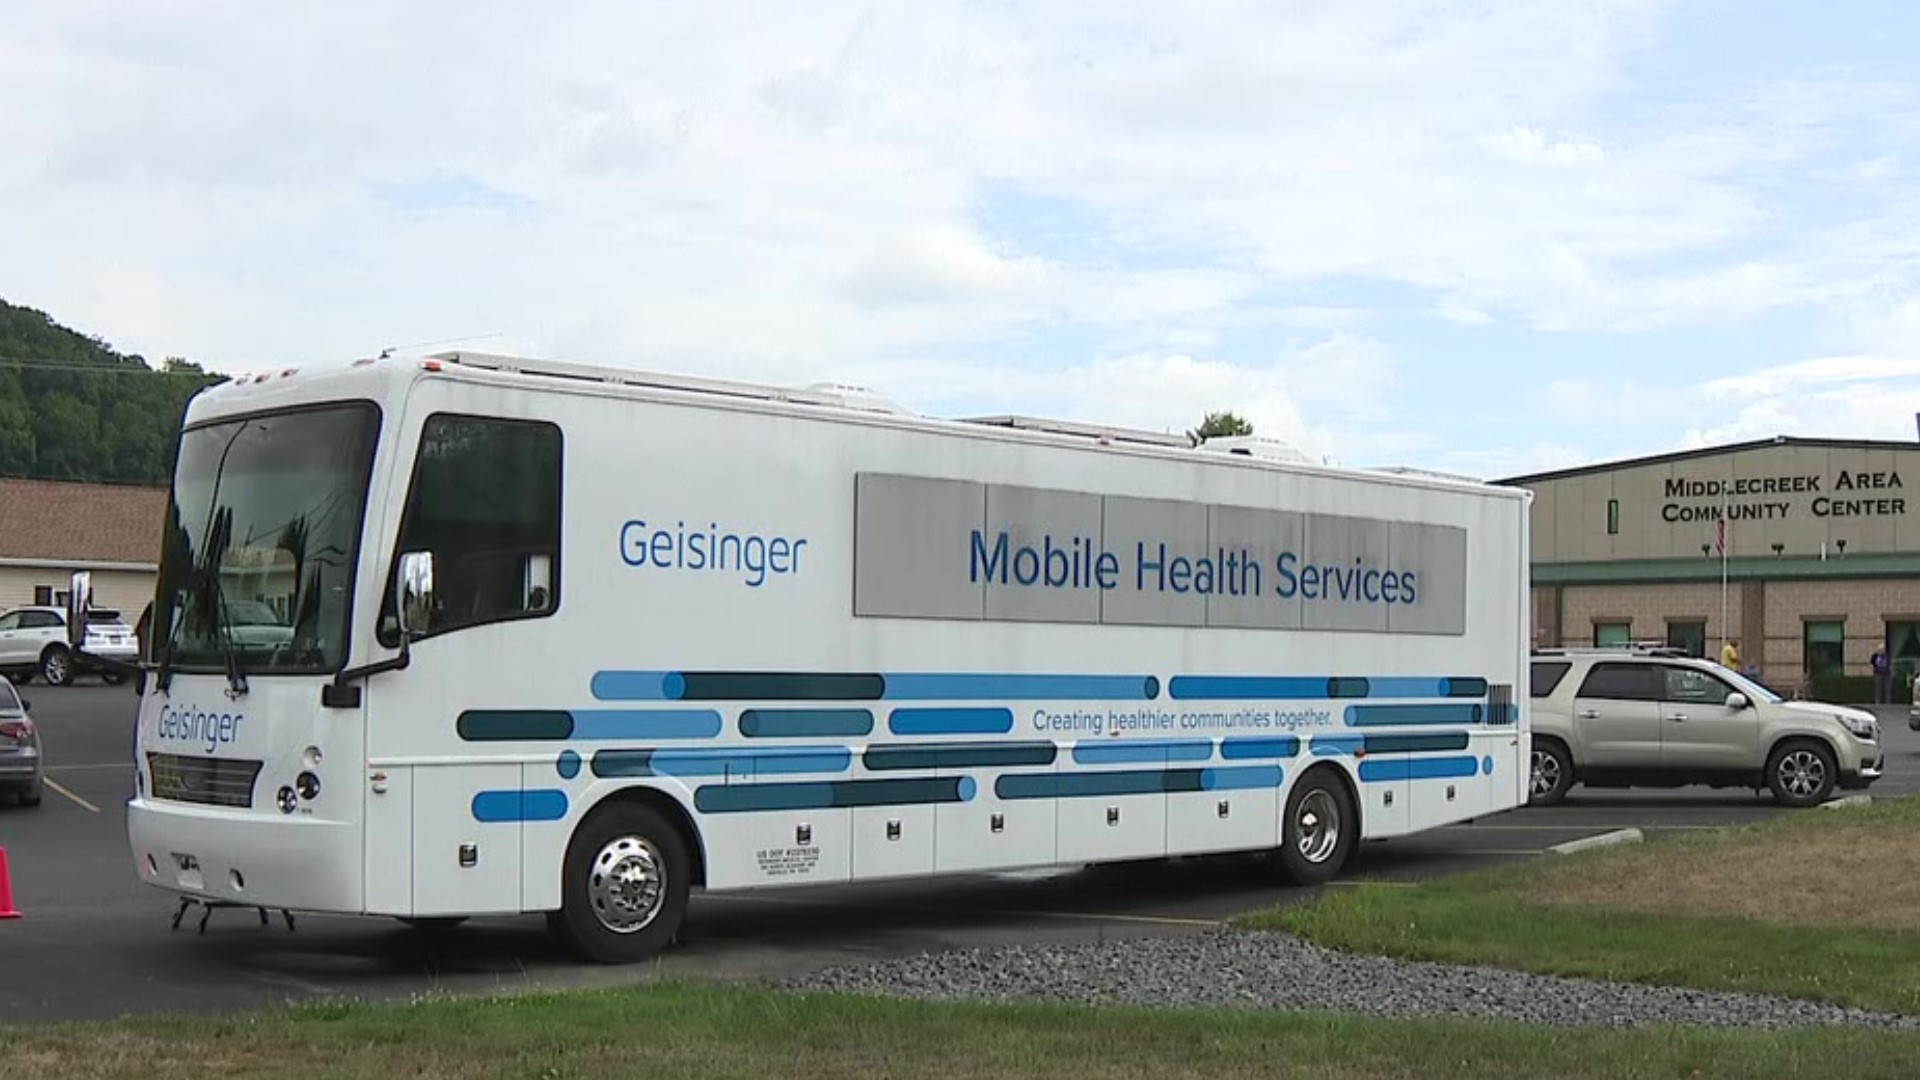 Geisinger is bringing care into rural communities with its Mobile Health Services bus.